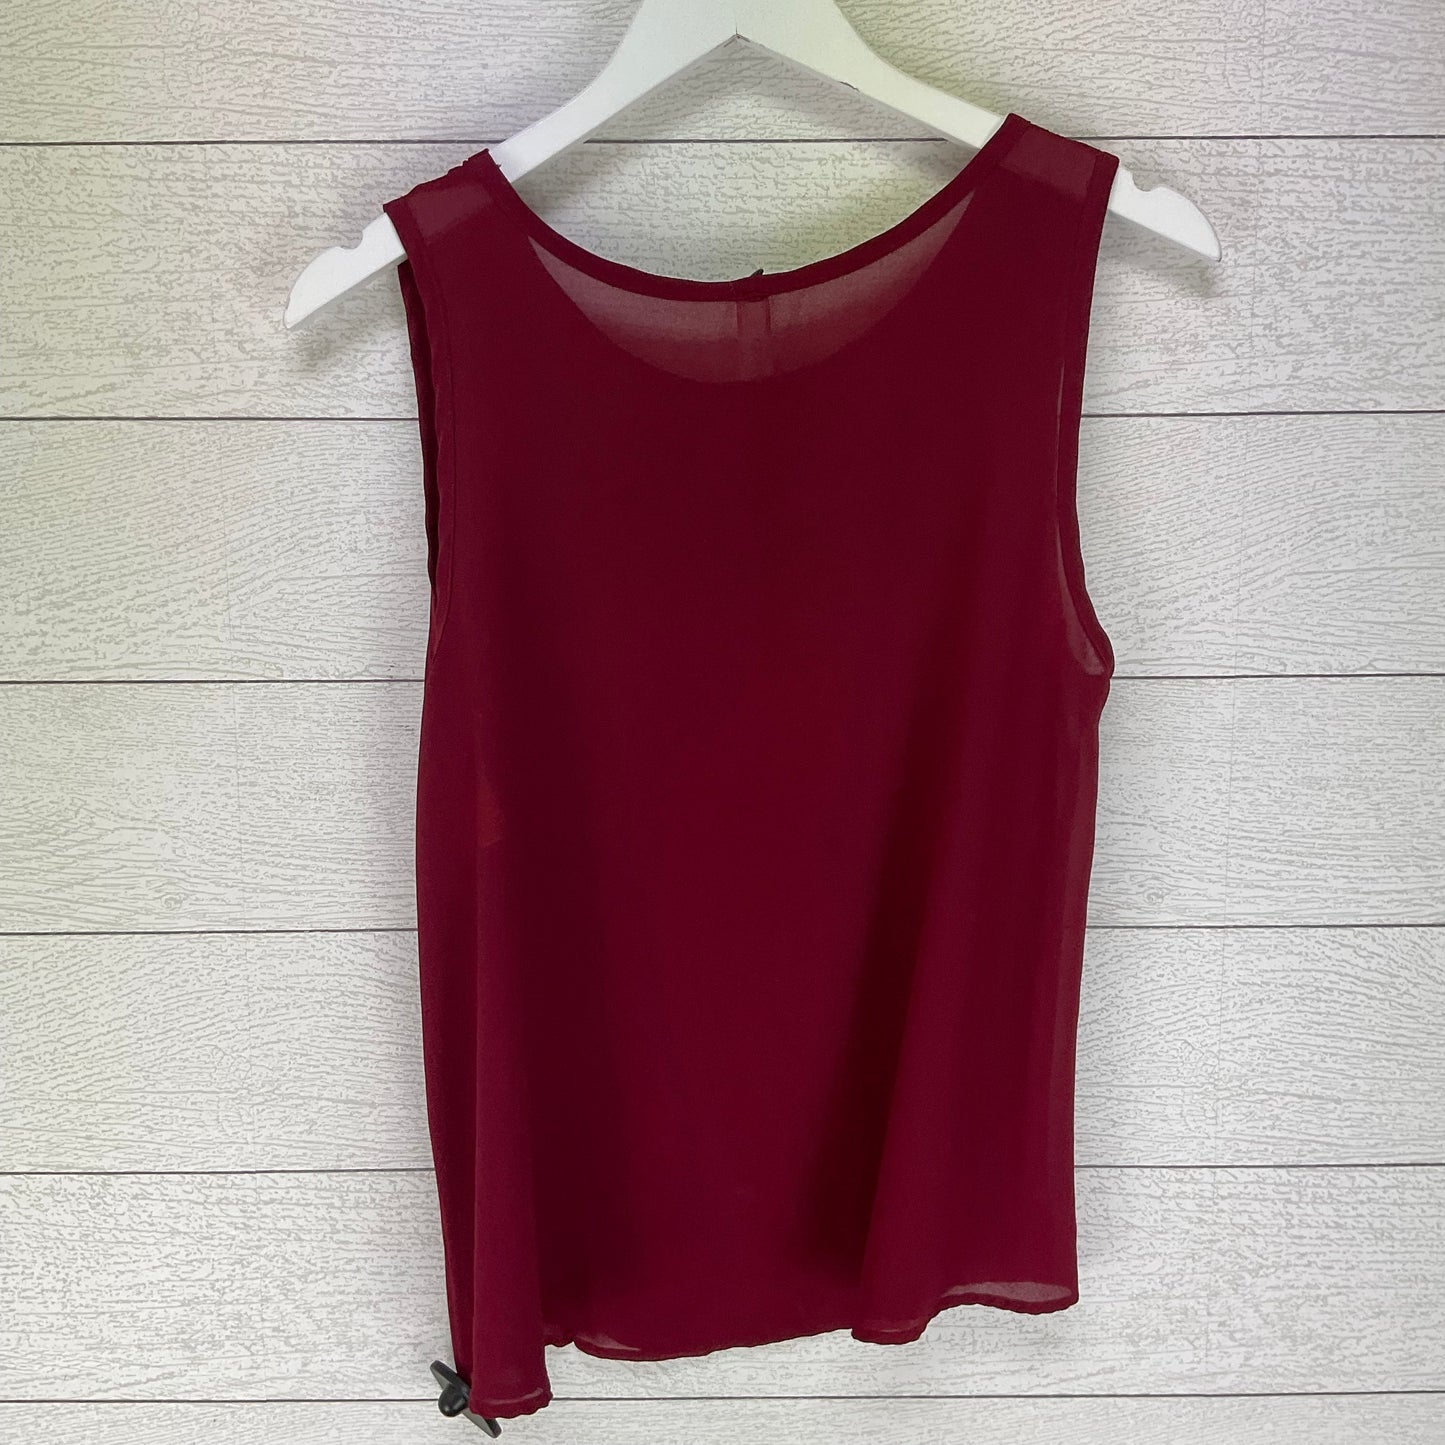 Top Sleeveless By Universal Thread  Size: M